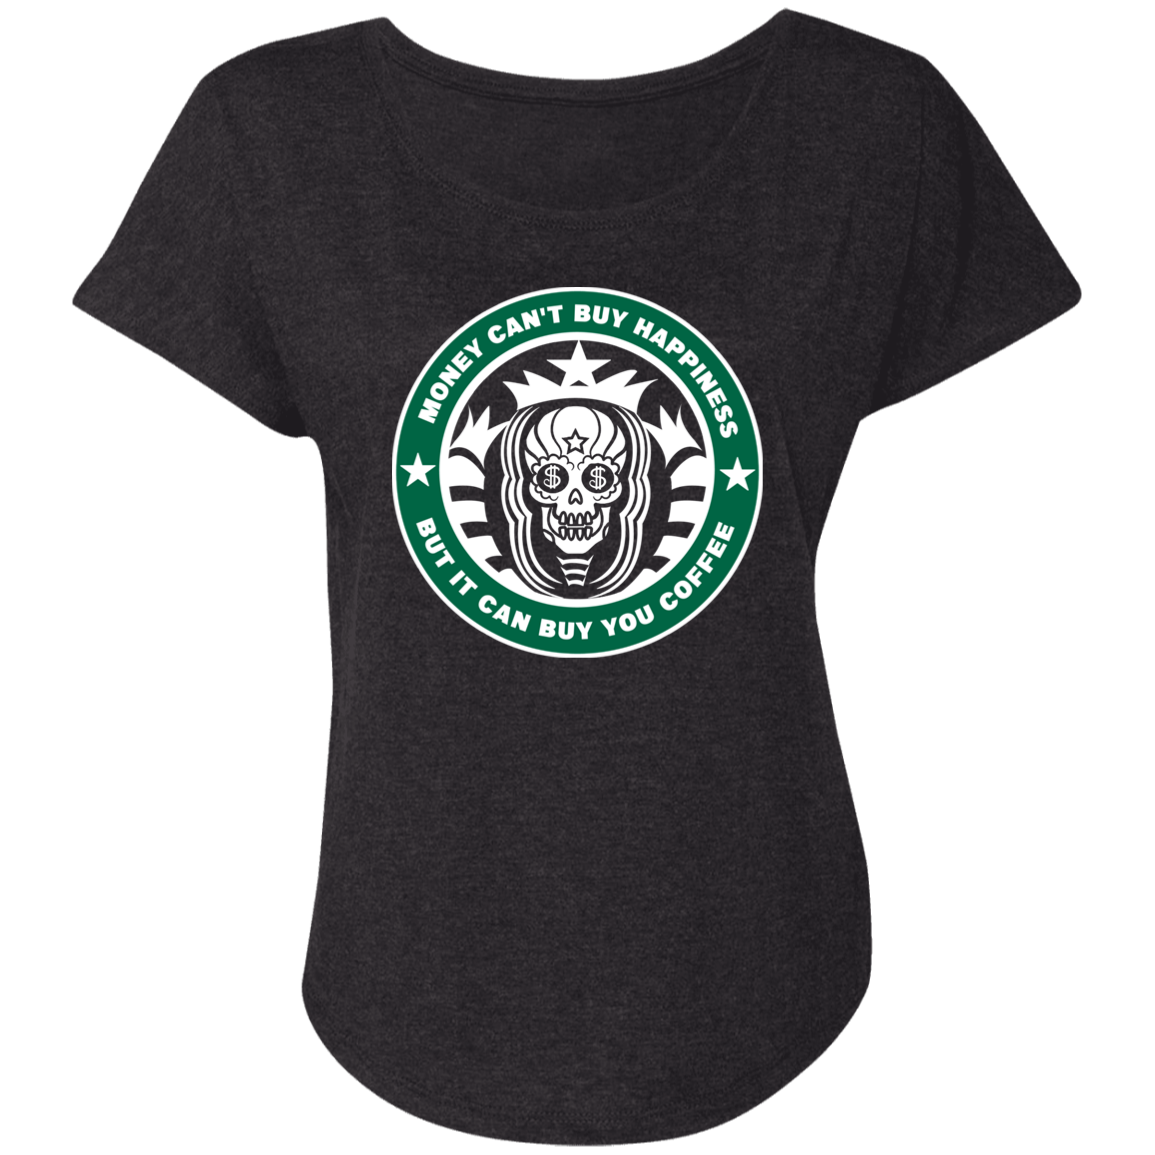 ArtichokeUSA Custom Design. Money Can't Buy Happiness But It Can Buy You Coffee. Ladies' Triblend Dolman Sleeve